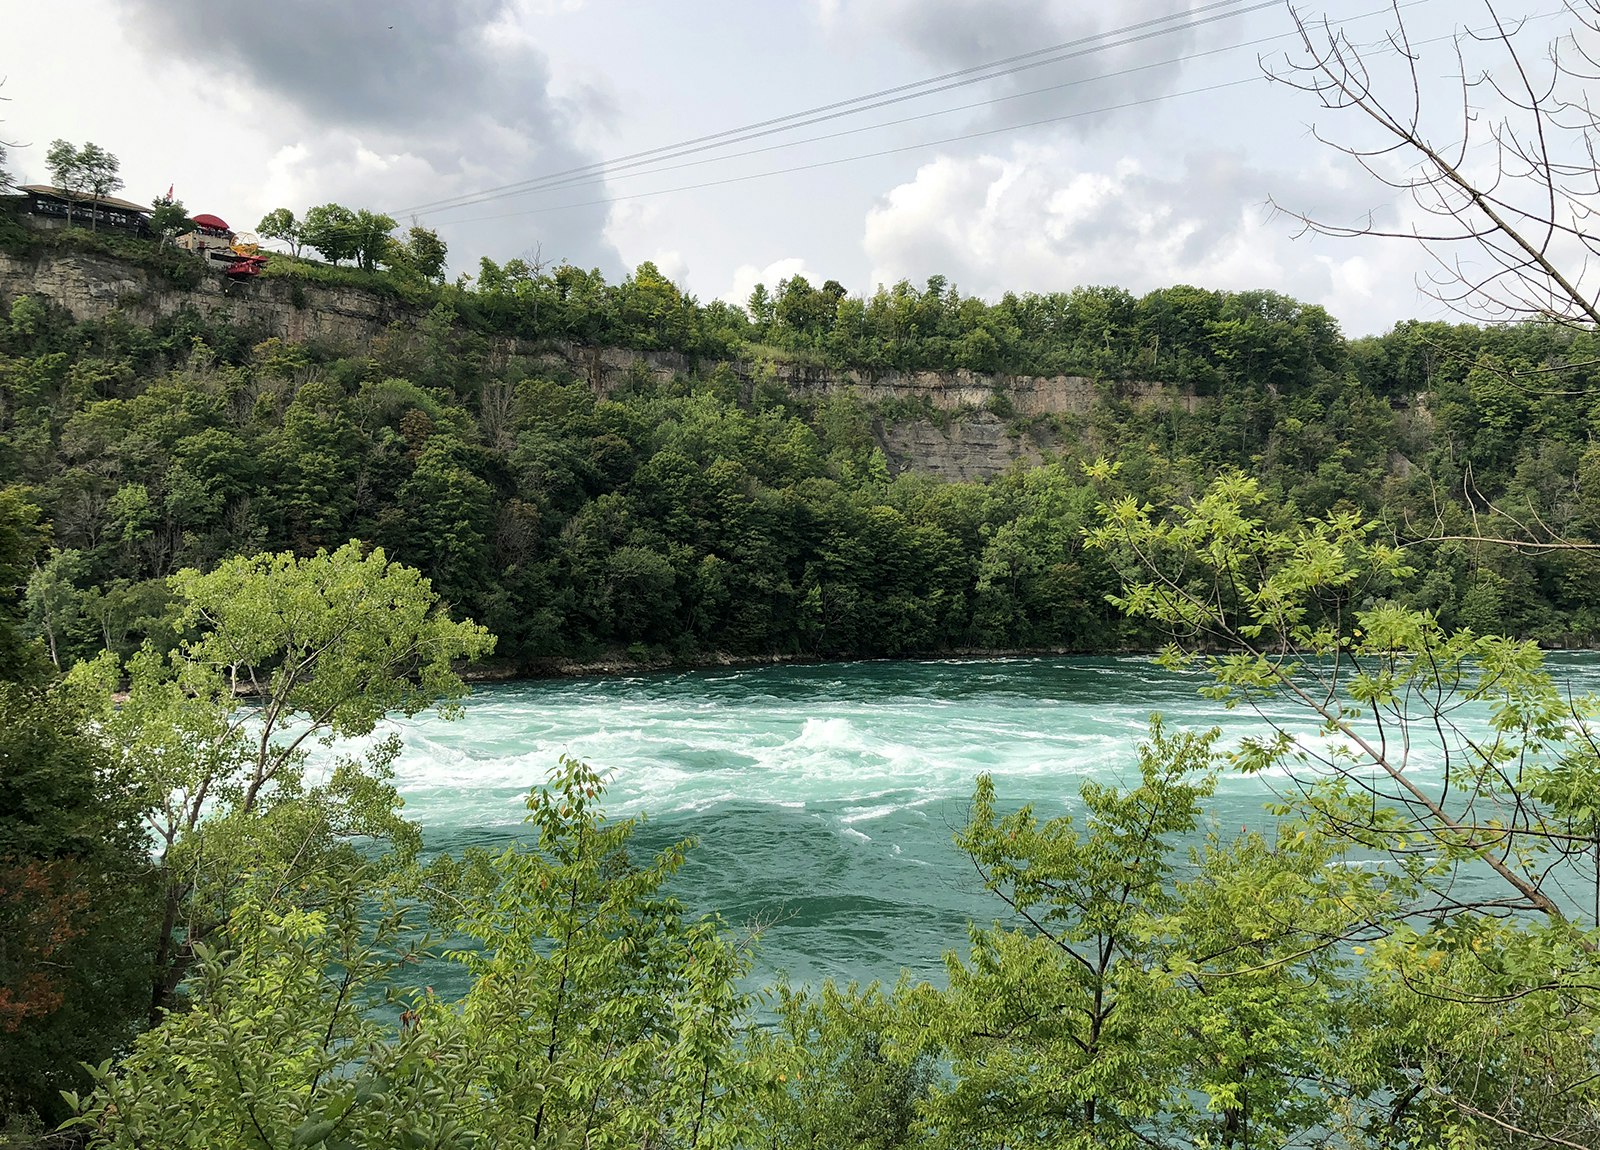 Vivid blue whirlpool with cliffs behind it and trees in front of it on a cloudy summer day in Niagara Gorge